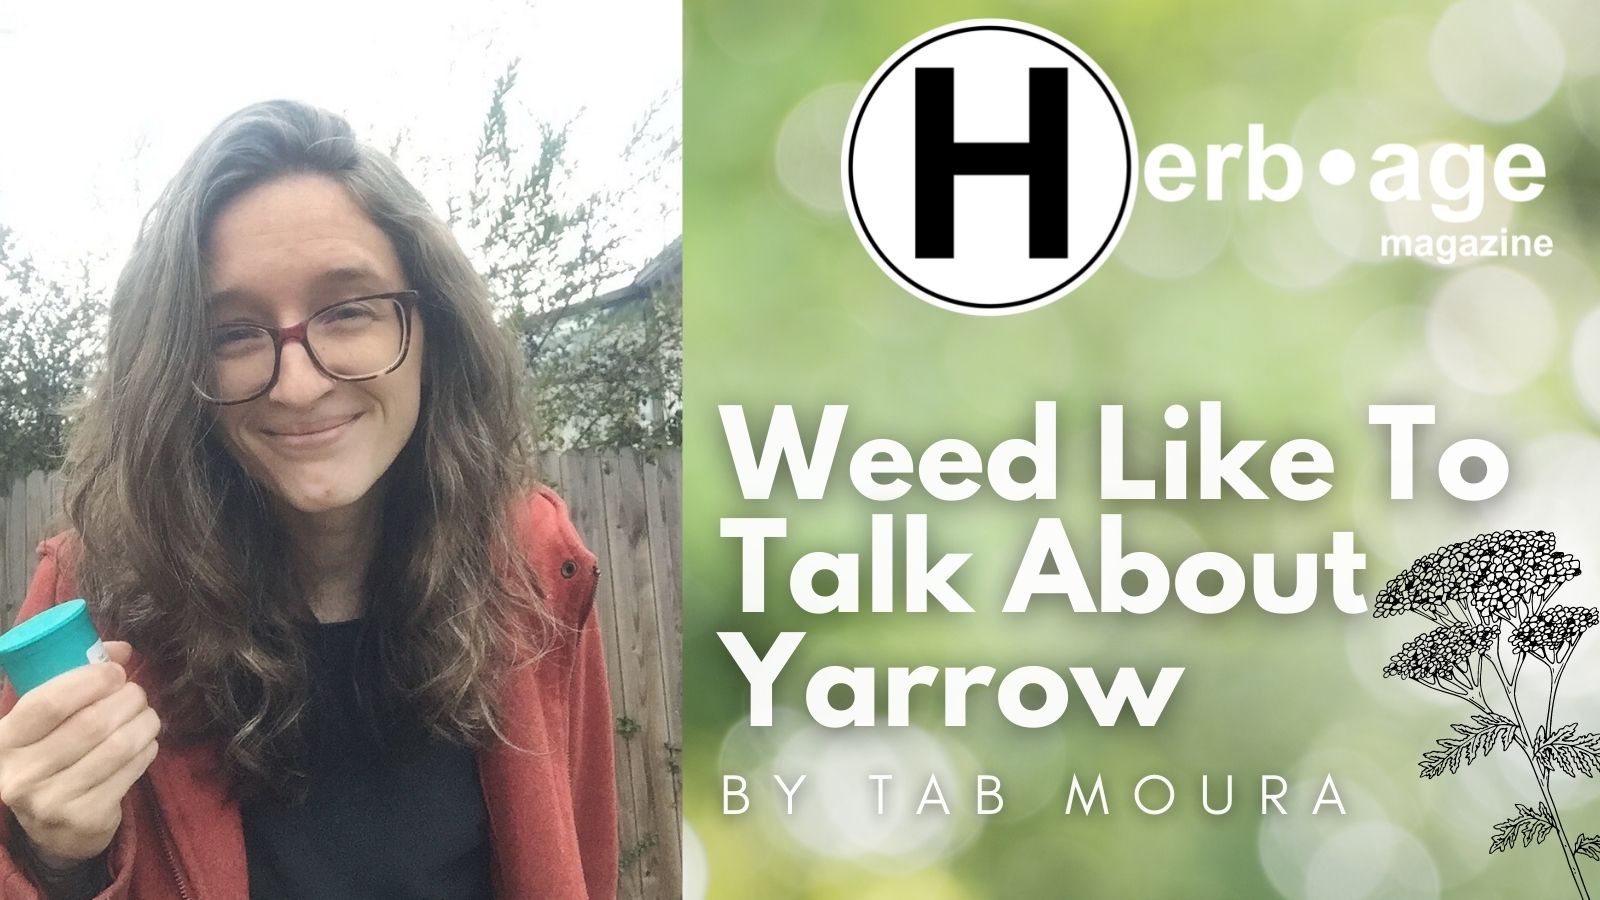 Weed Like To Talk About Yarrow